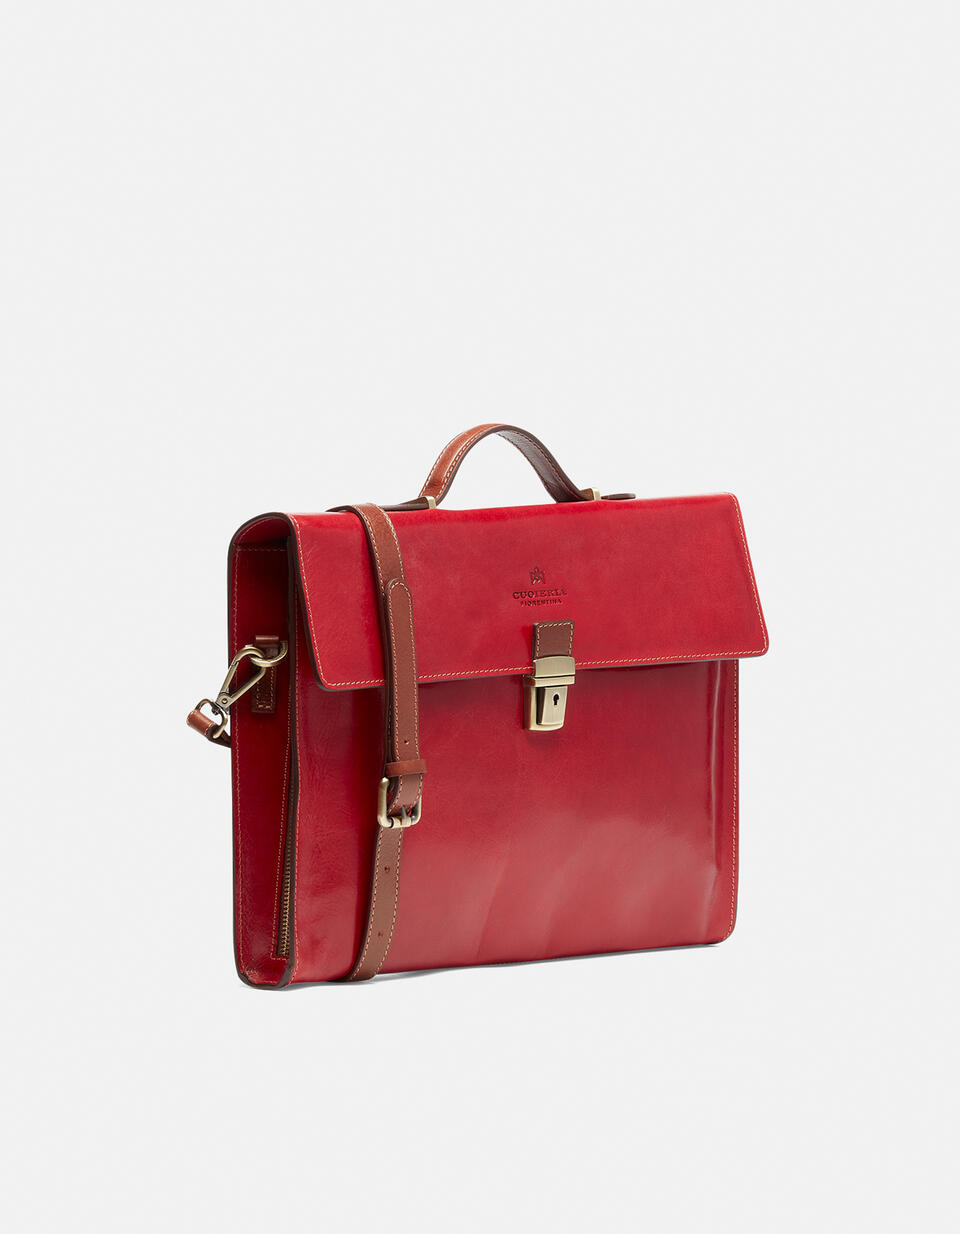 Warm and Colour leather briefcase with side zips - Briefcases and Laptop Bags | Briefcases ROSSOBICOLORE - Briefcases and Laptop Bags | BriefcasesCuoieria Fiorentina